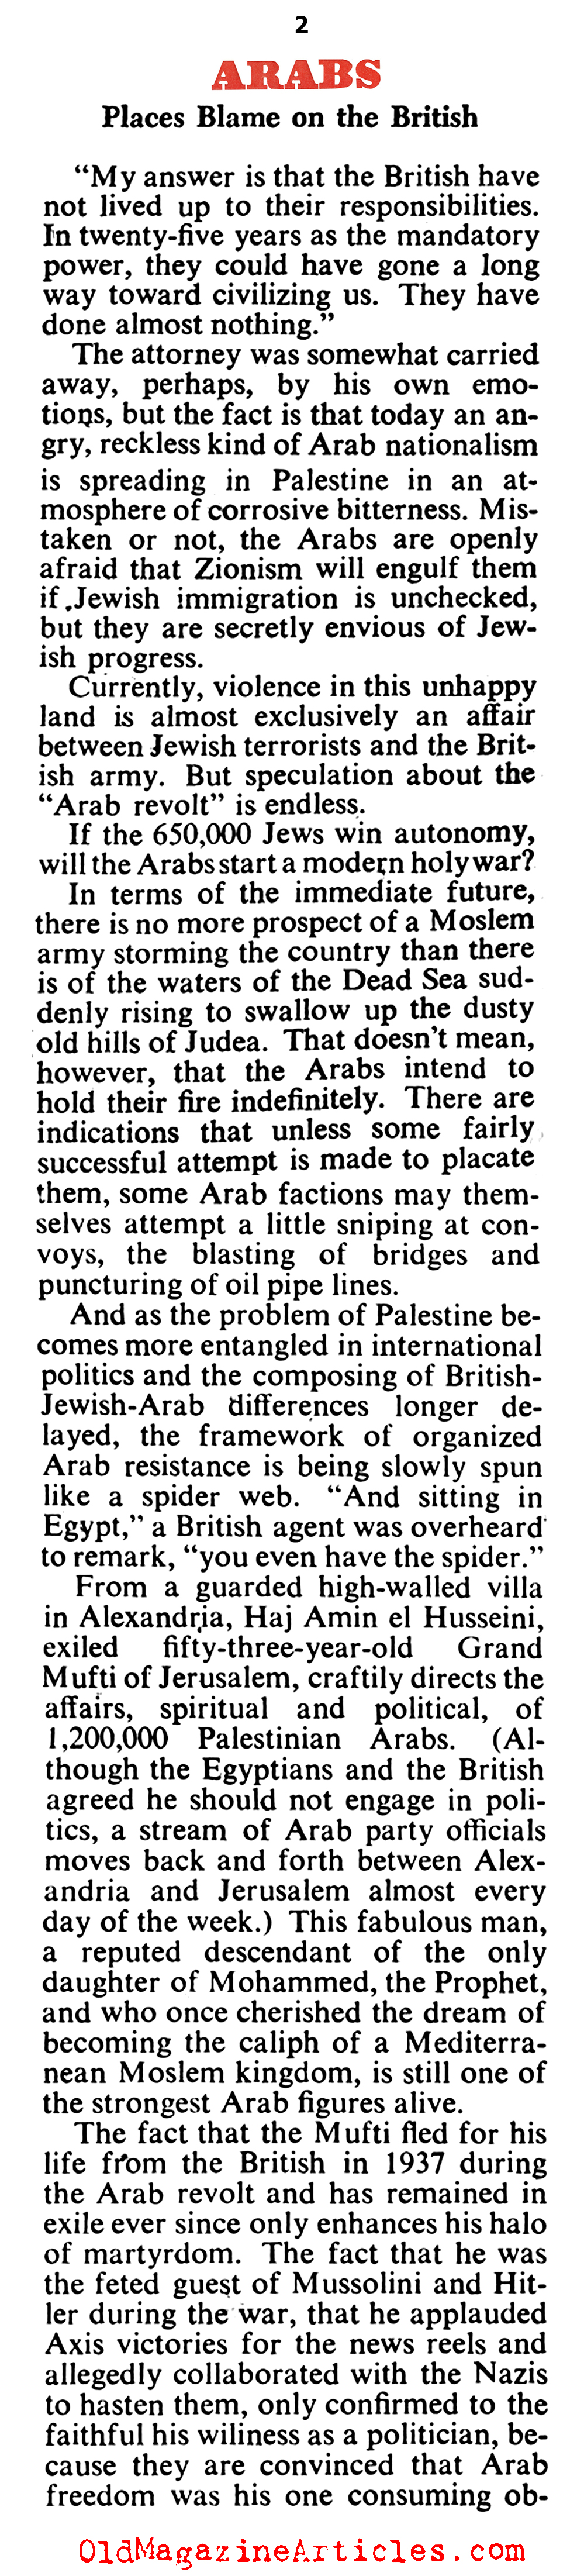 The Arabs Mobilize (Collier's Magazine, 1947)